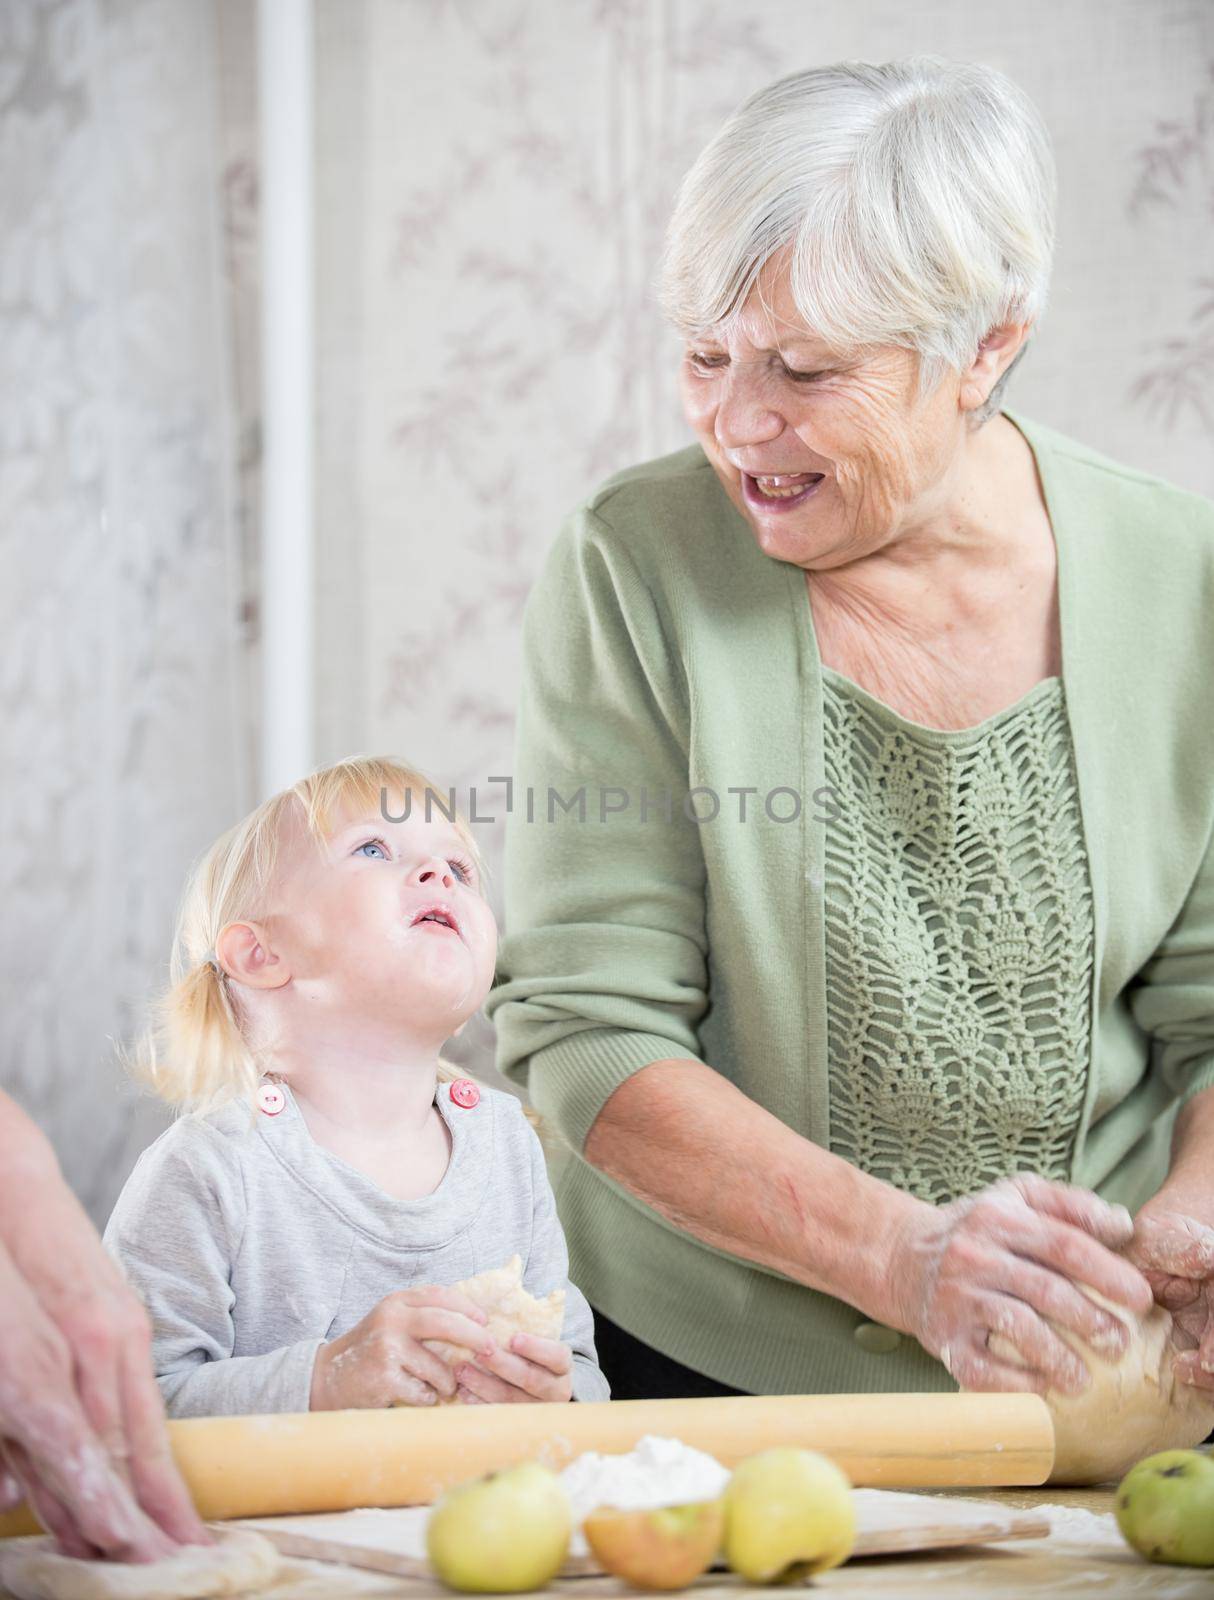 A grandmother making little pies with a little girl. by Studia72